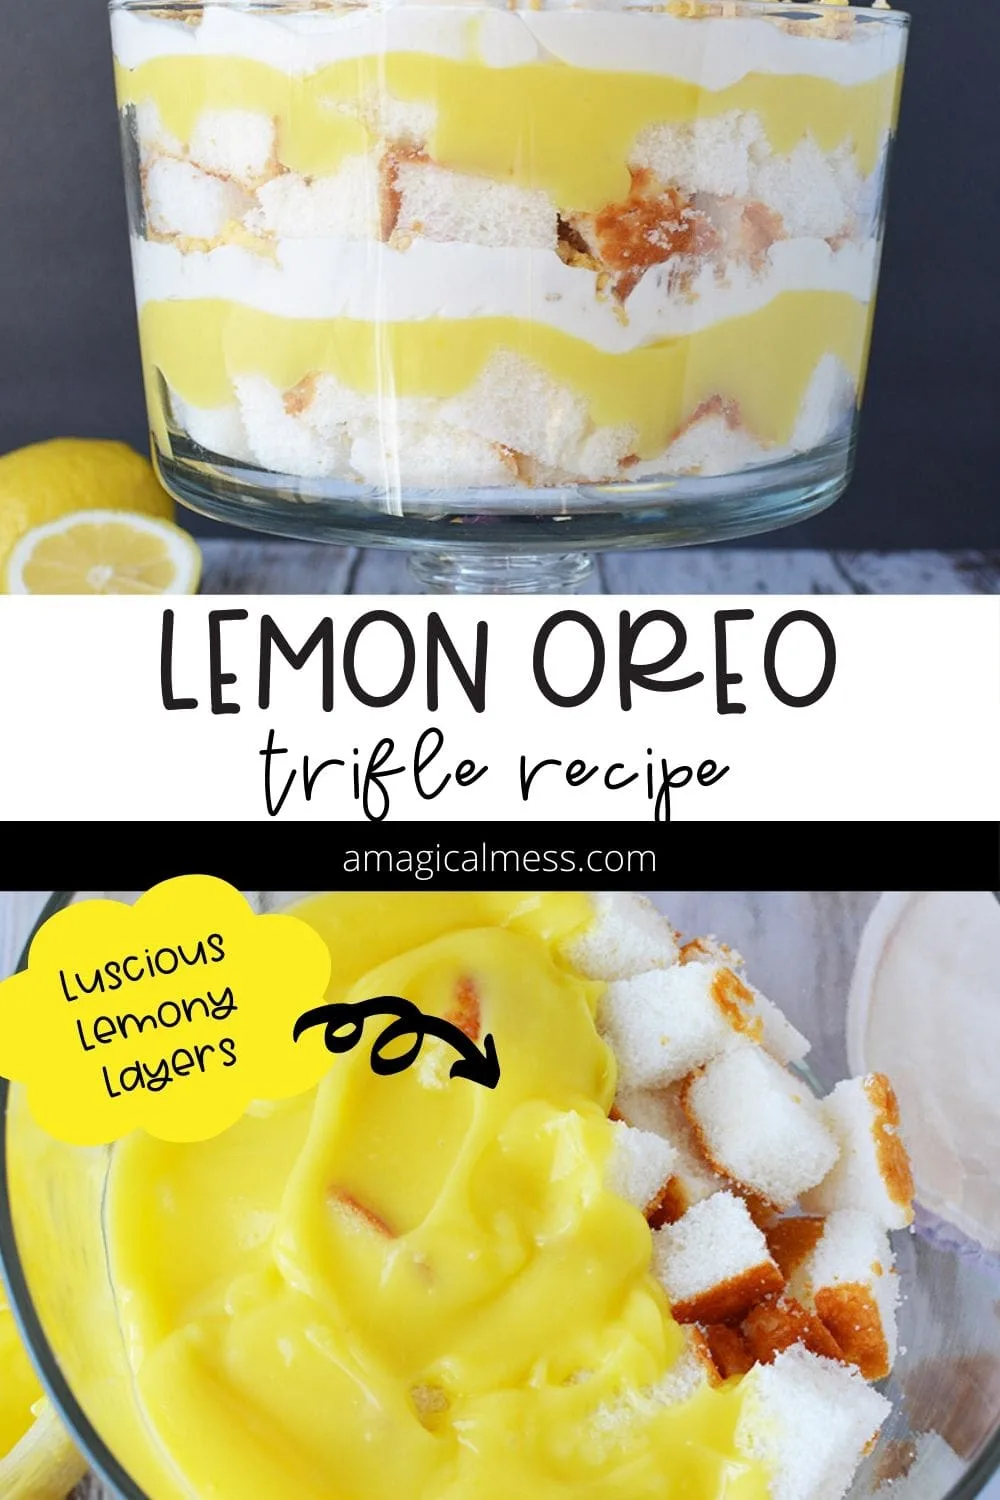 Layers of lemon in a trifle